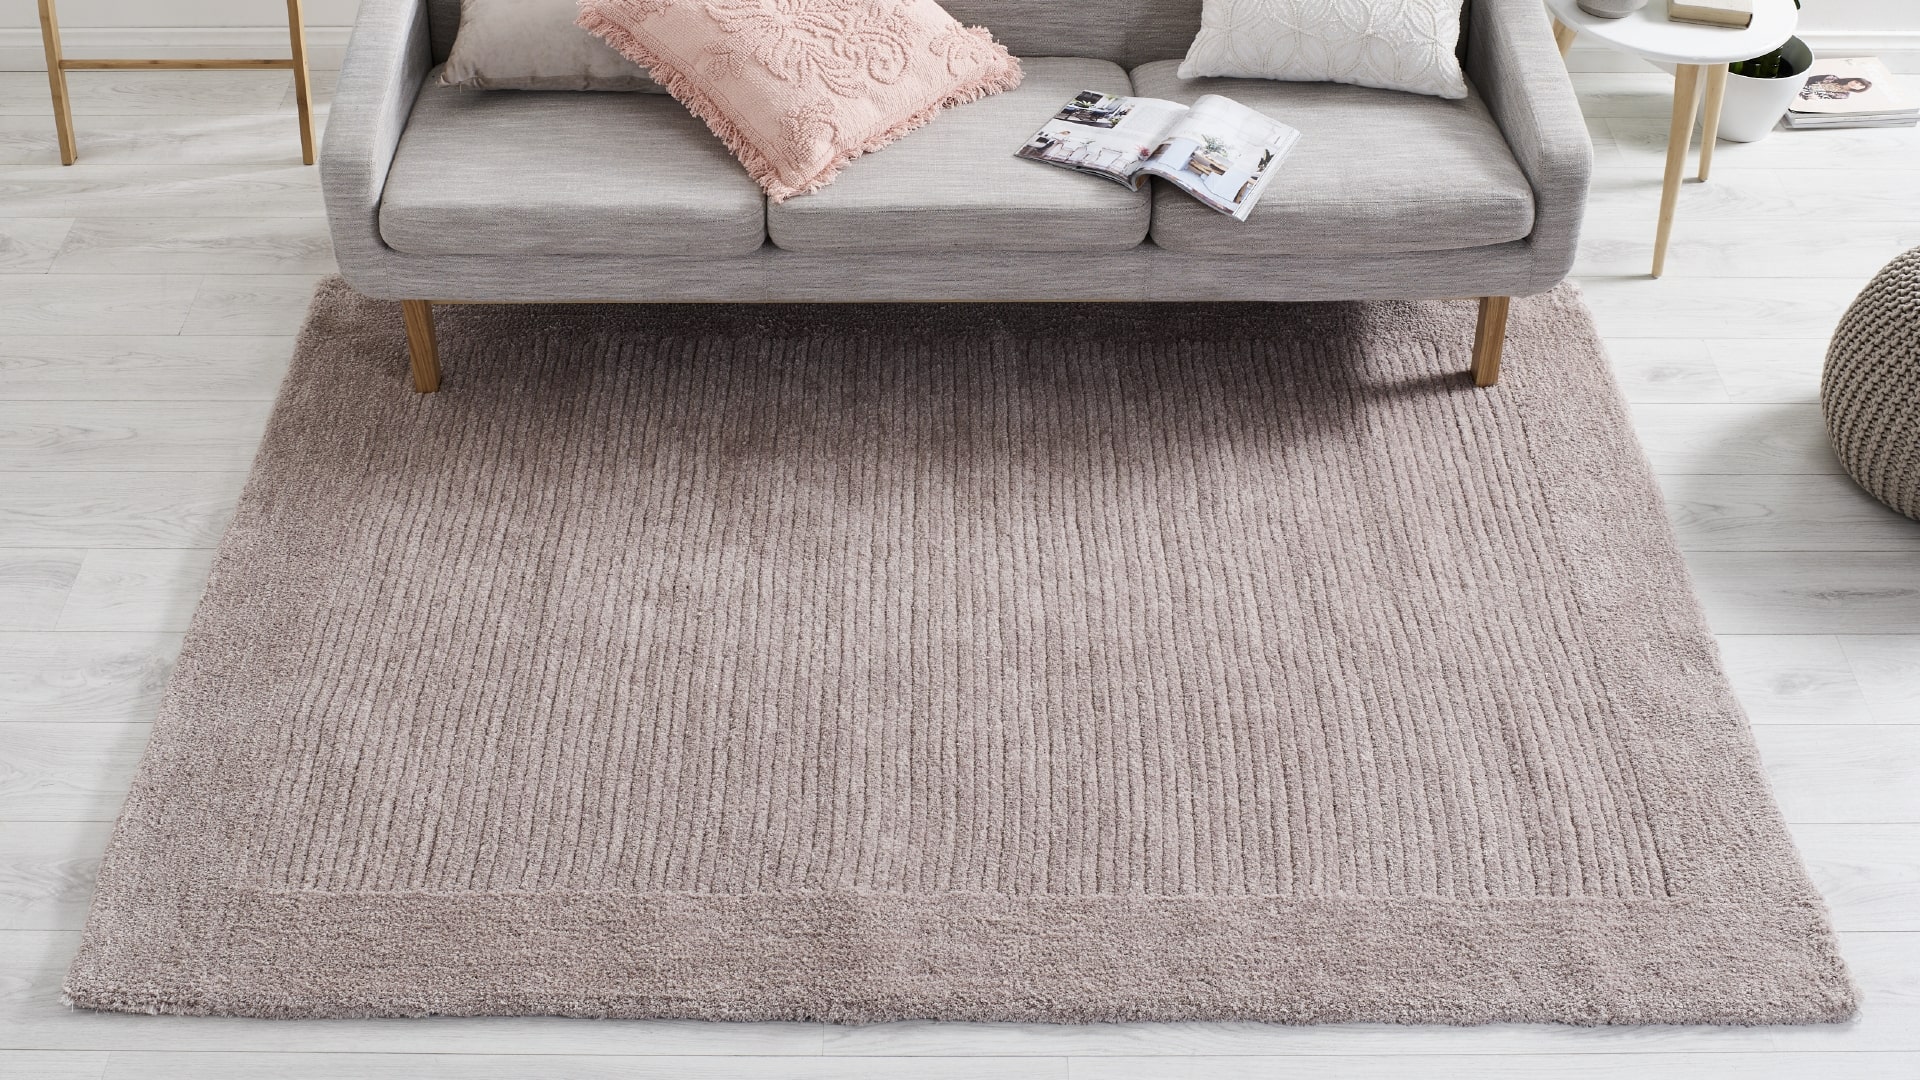 Rotate & Refresh Your Rugs & Mats